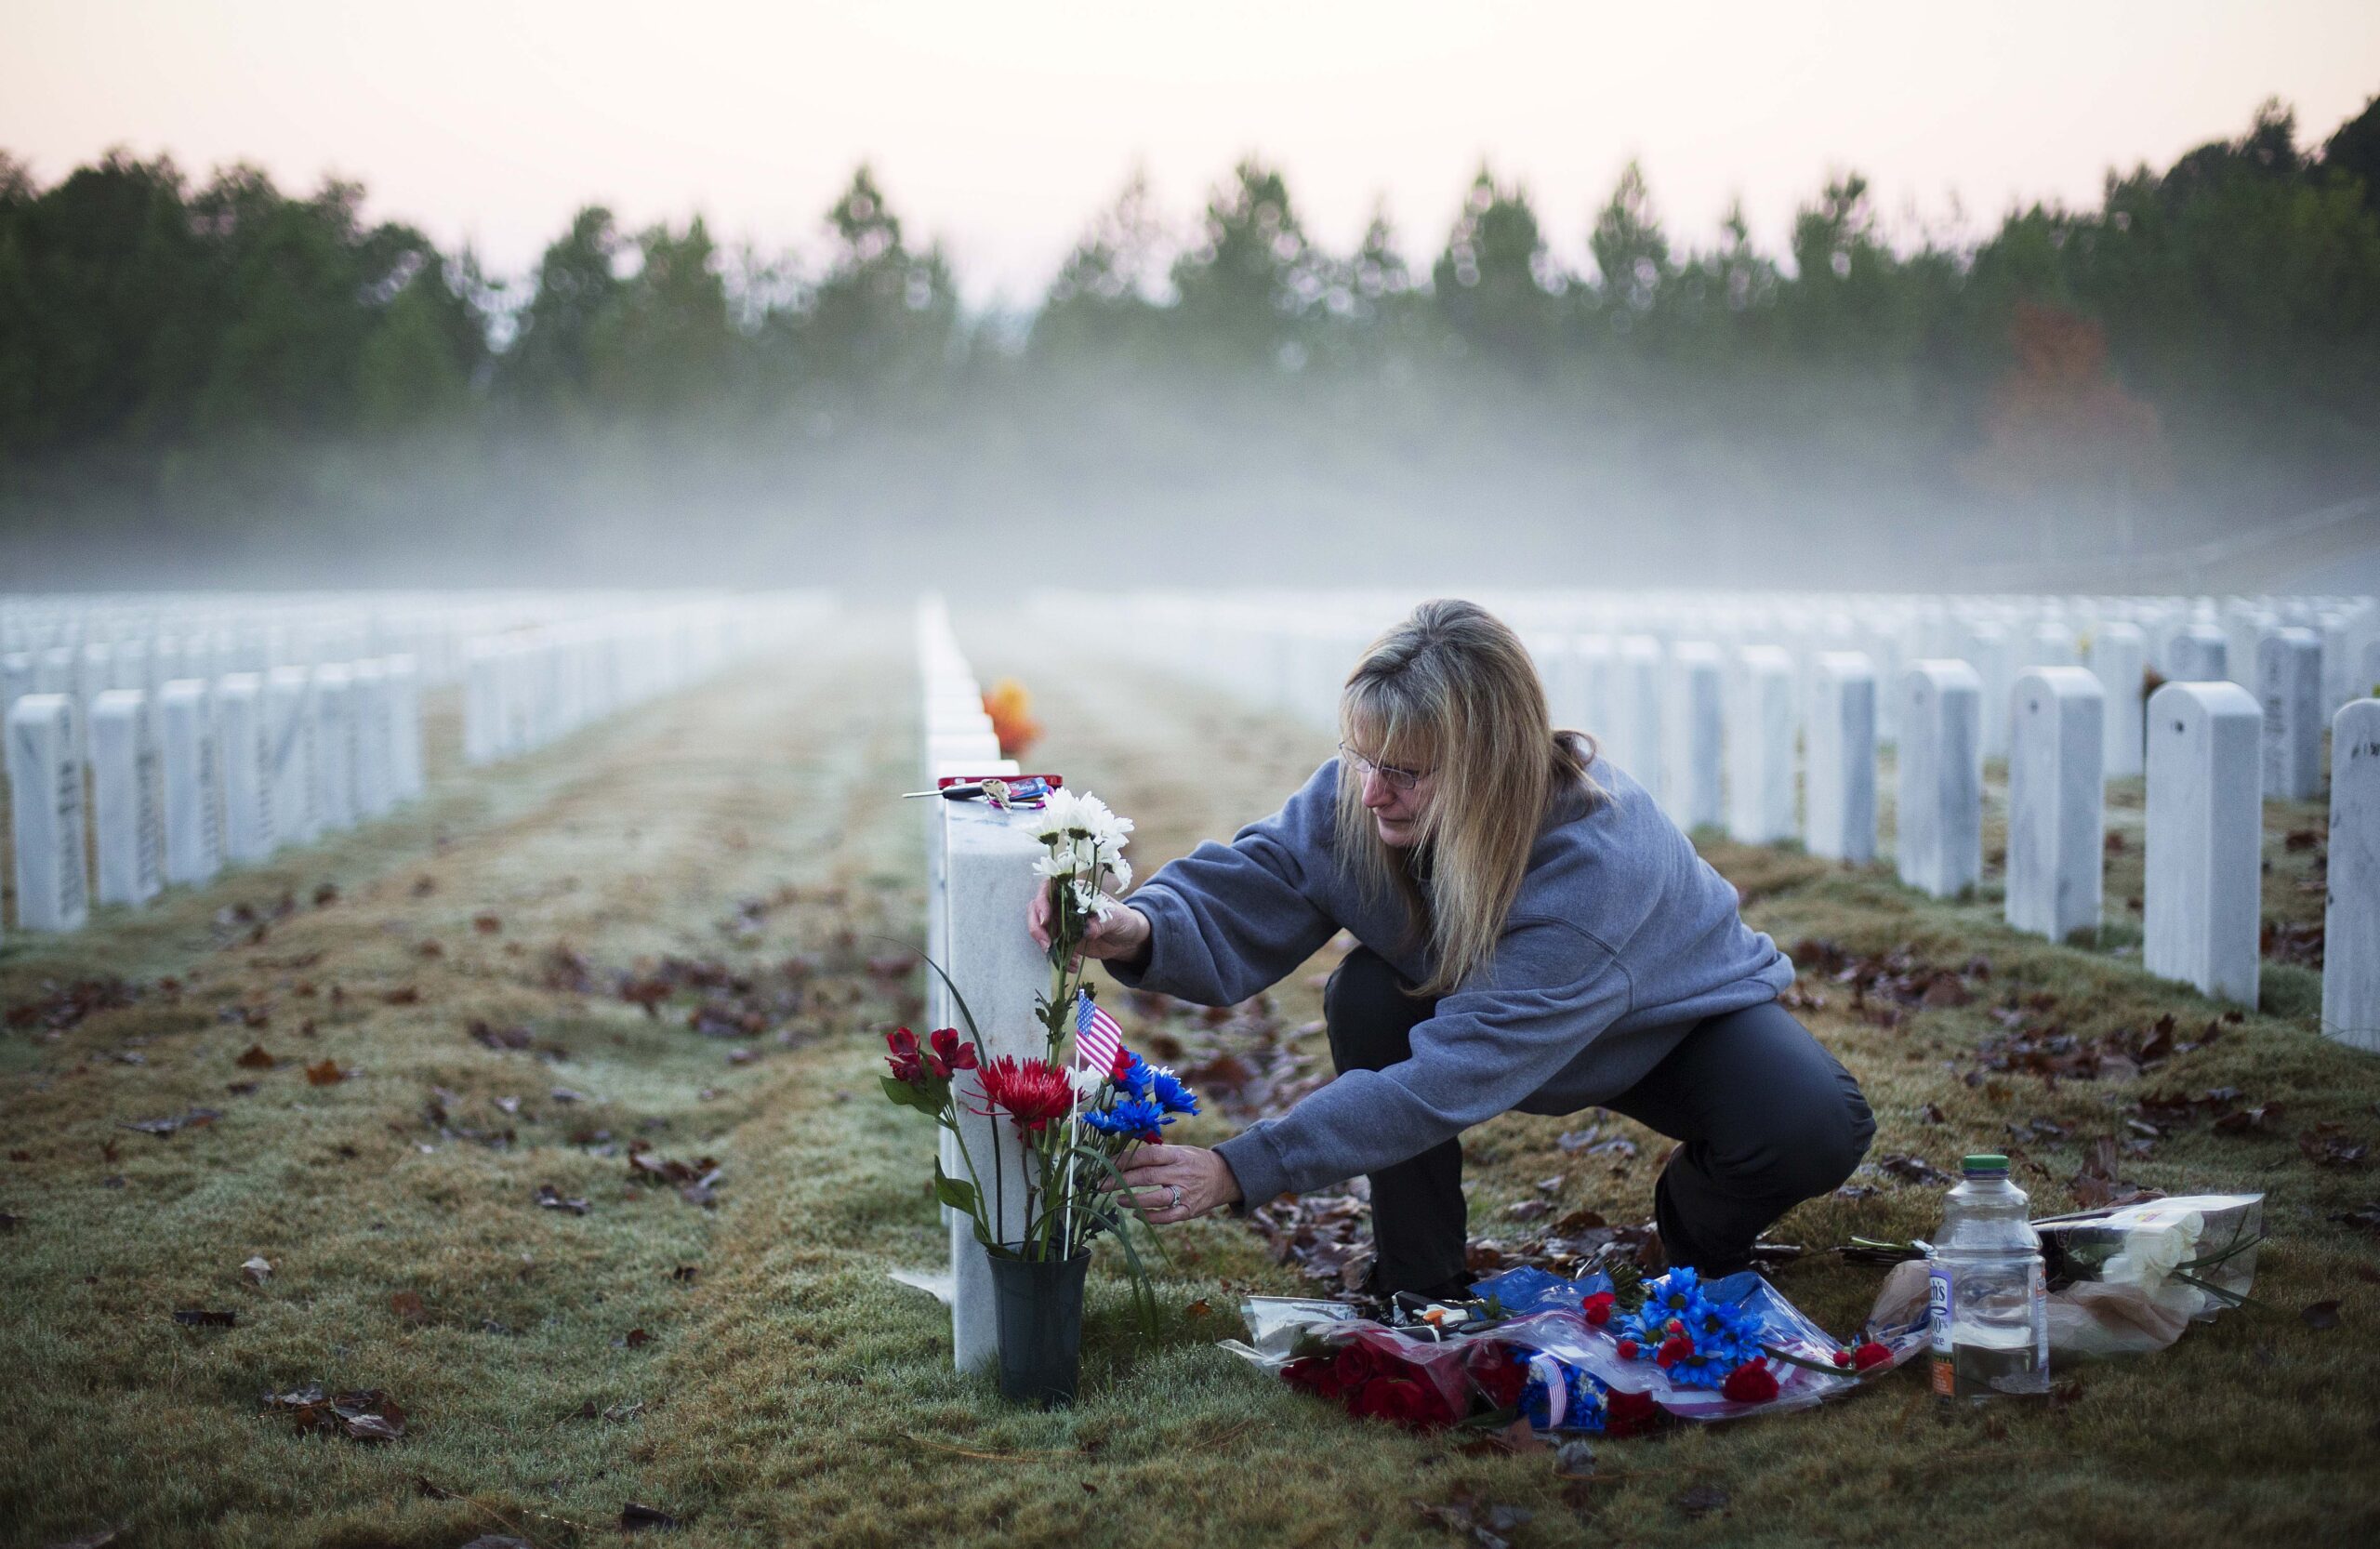 A woman places flowers at a military gravestone in a cemetery